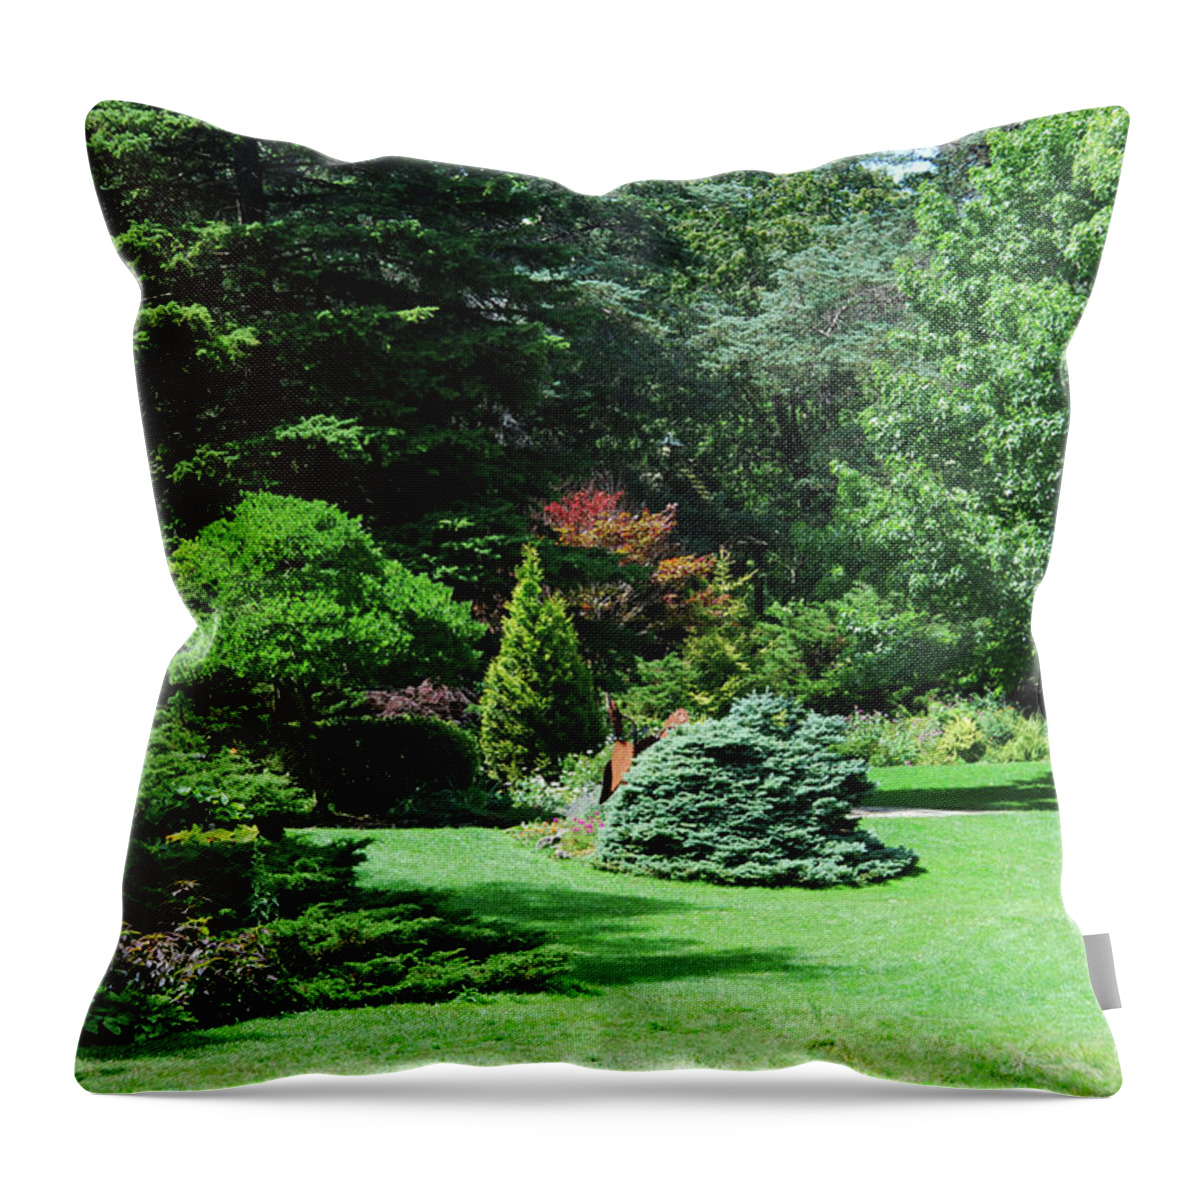 Gardening Throw Pillow featuring the photograph City Garden by Ee Photography